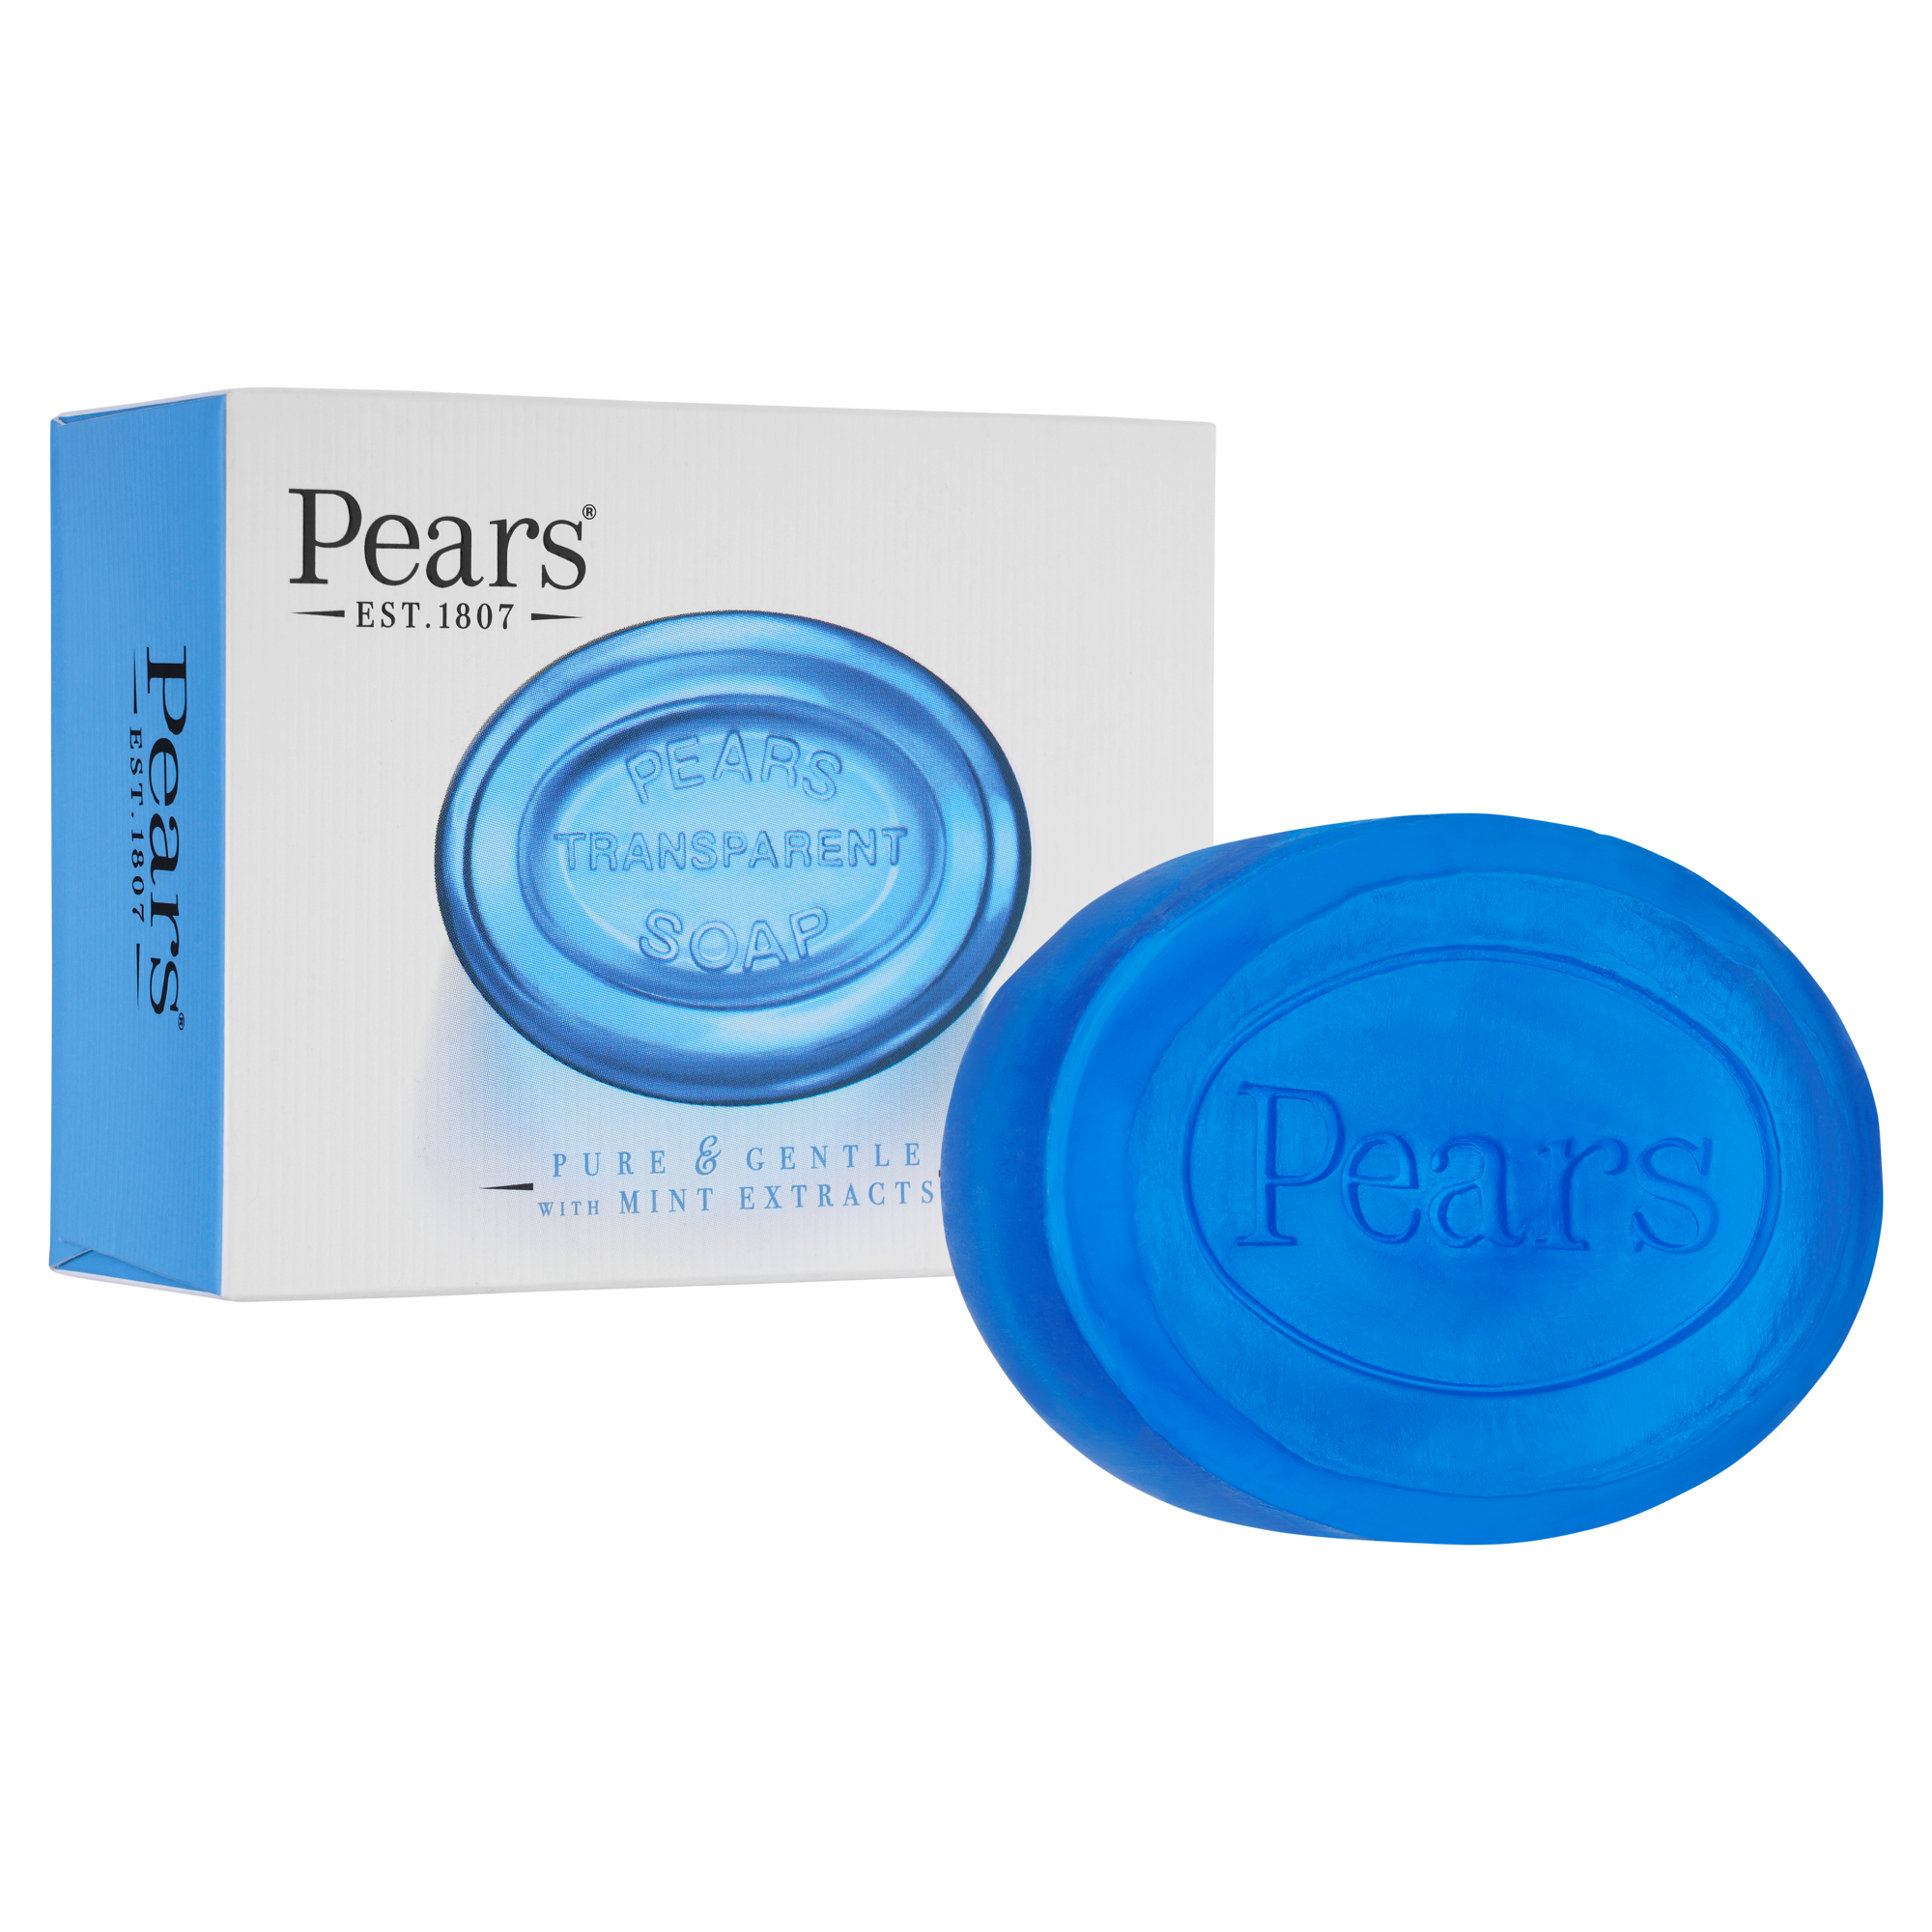 Pears Transparent Soap with Mint Extracts 100g